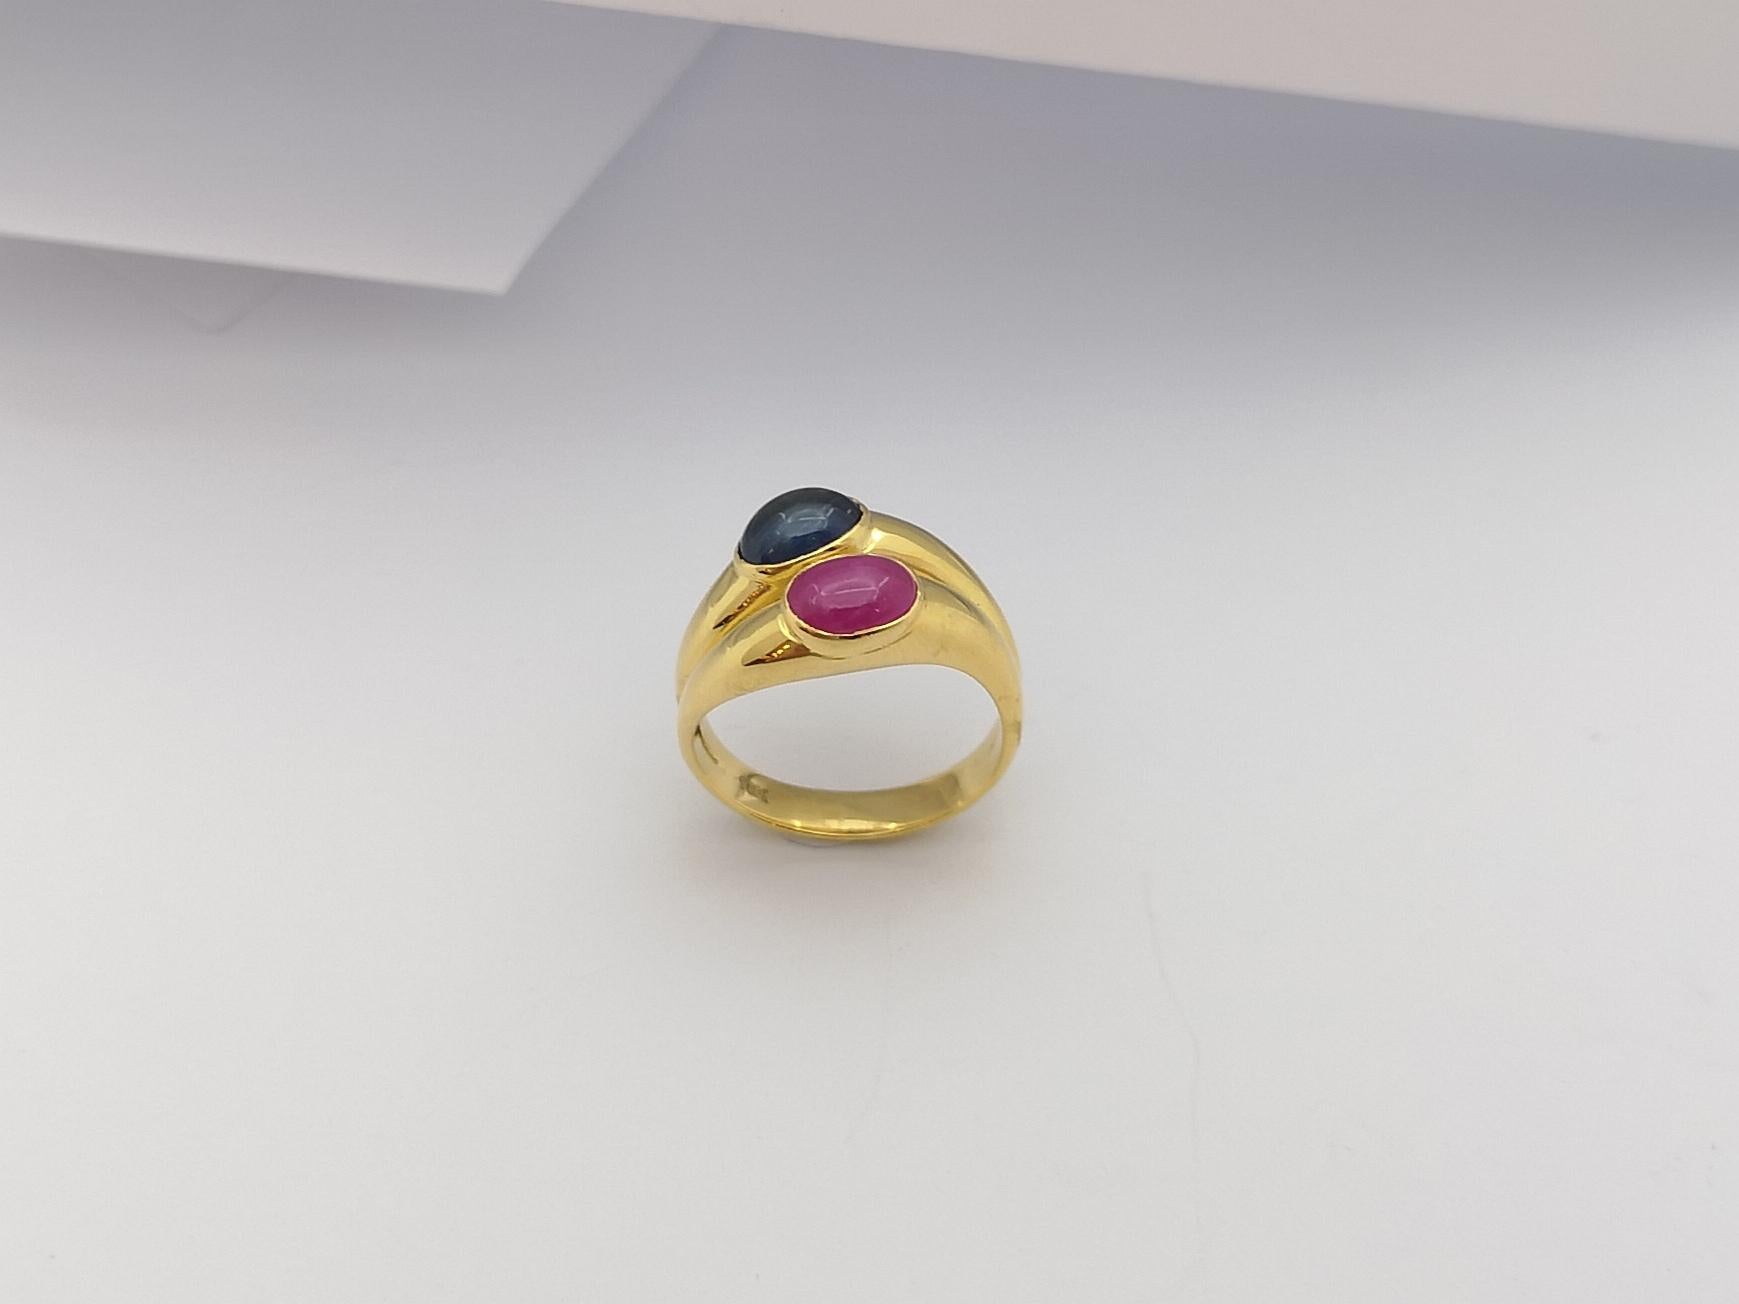 Cabochon Ruby and Cabochon Blue Sapphire Ring Set in 18 Karat Gold Settings For Sale 8